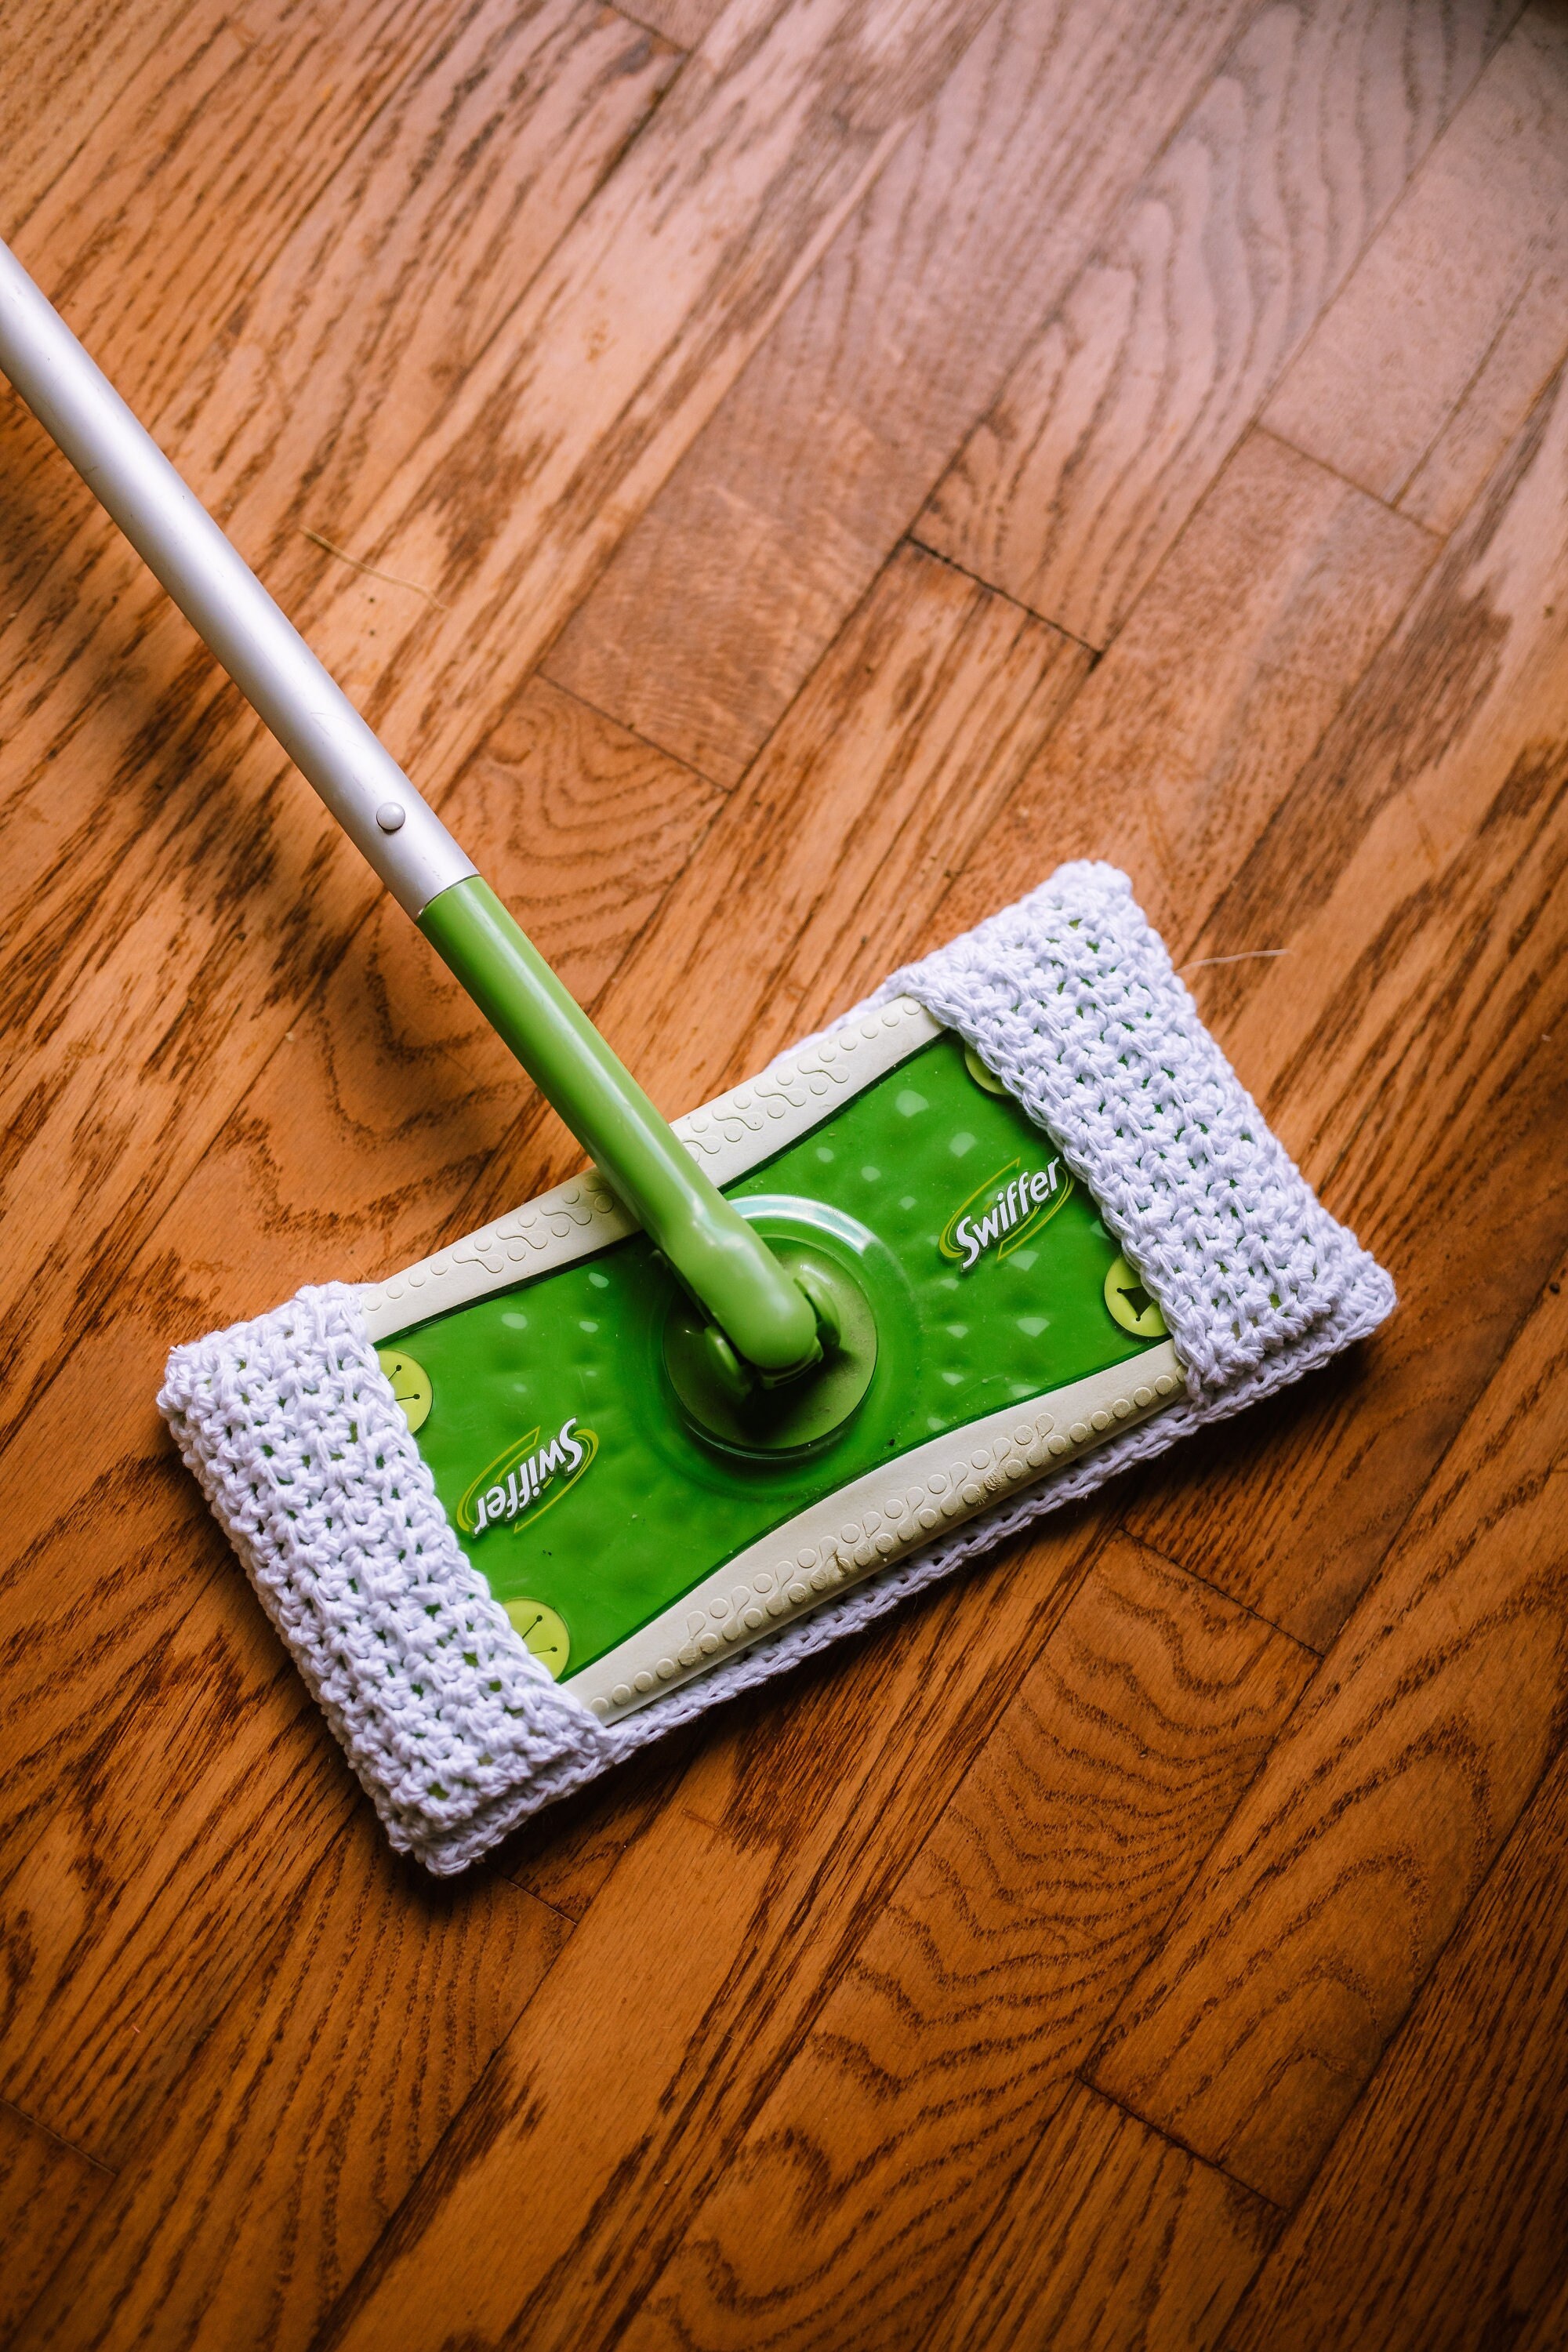 Swiffer Sweeper Dry Mop Cover Handmade Reusable Crocheted Cotton